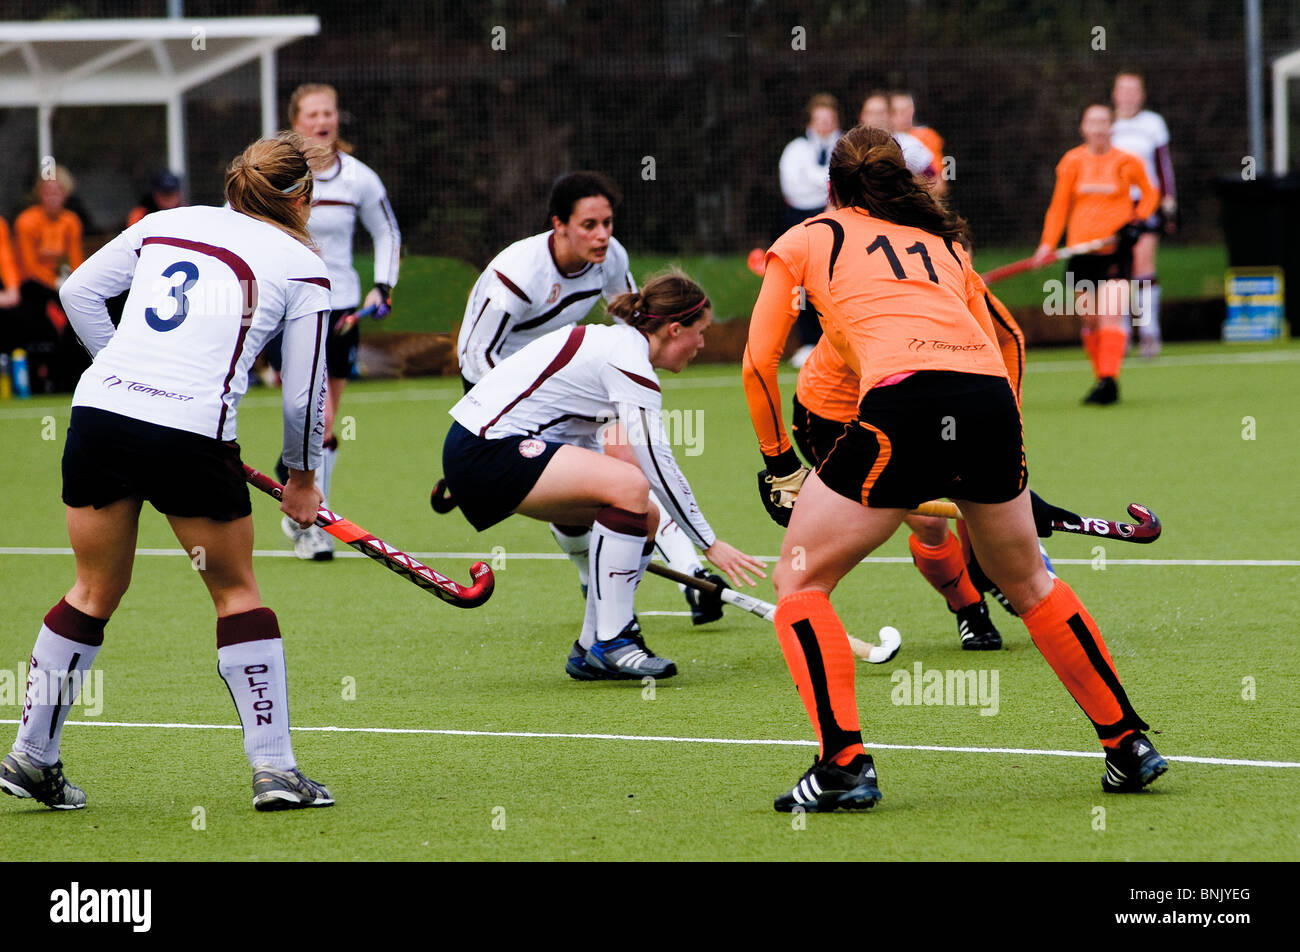 Leicester Ladies Hockey Team Orange Shirts Playing on Leicester Grammar School Pitch at Great Glen Stock Photo